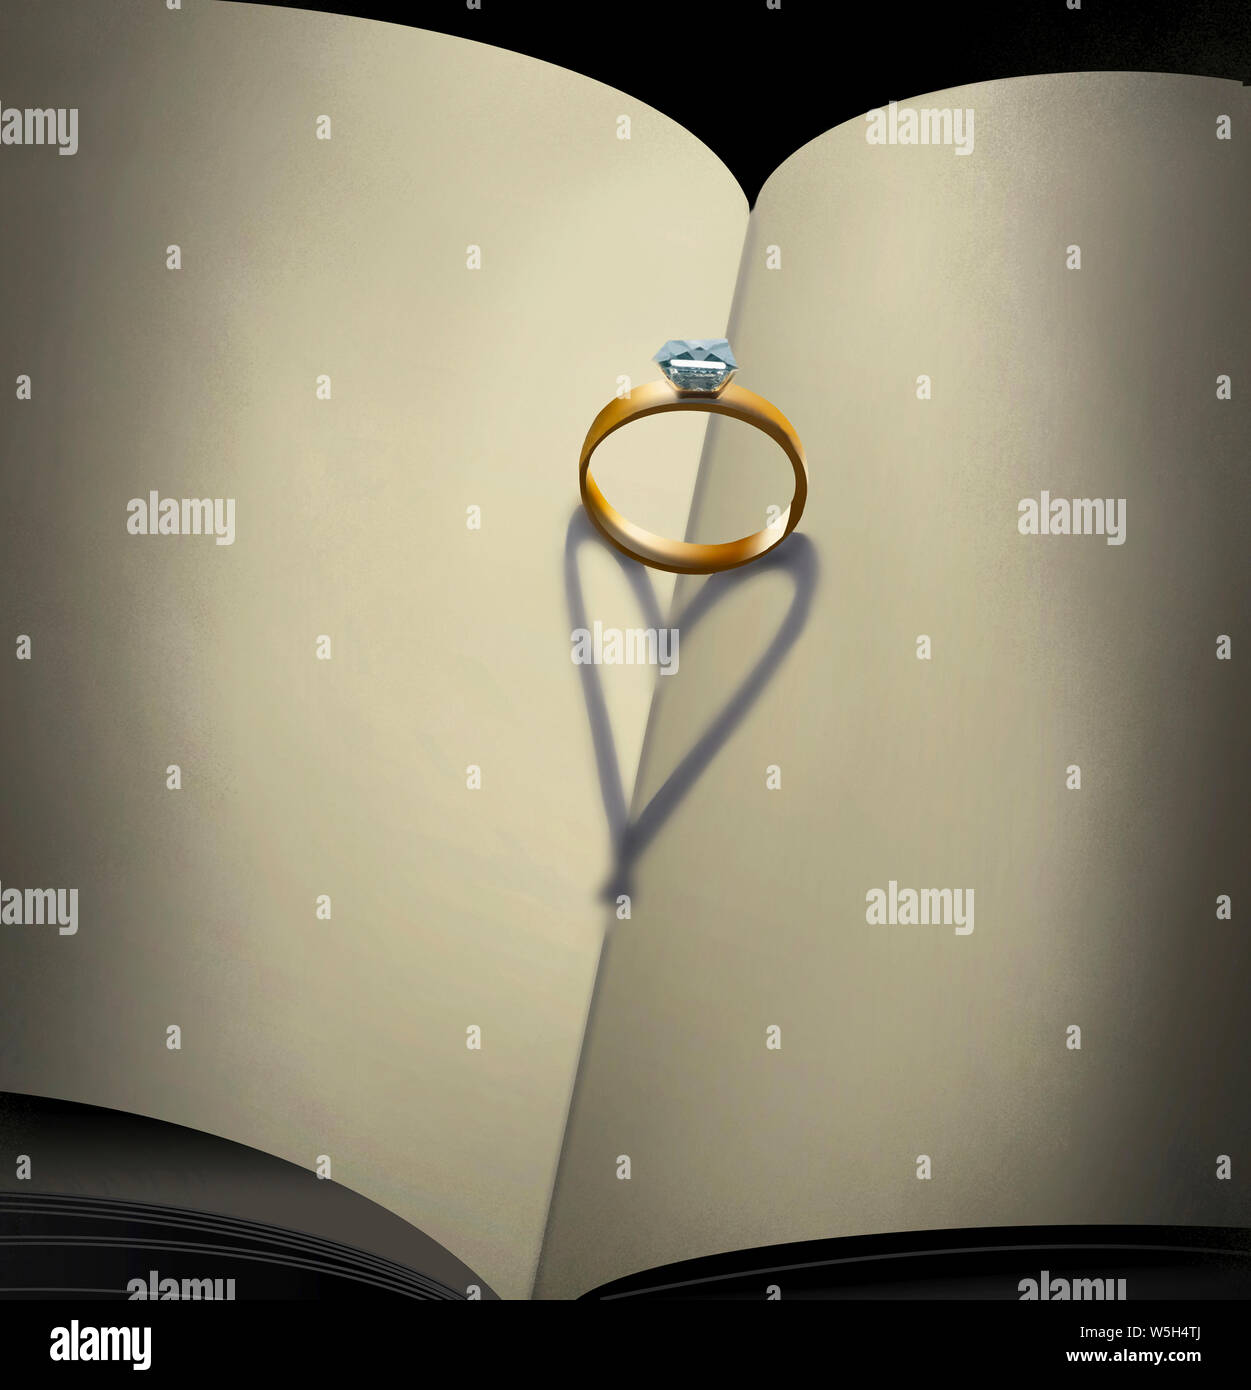 A gold wedding ring sitting on the pages of a blank book cast a shadow that looks like a heart in this illustration about future, love and marriage. Stock Photo